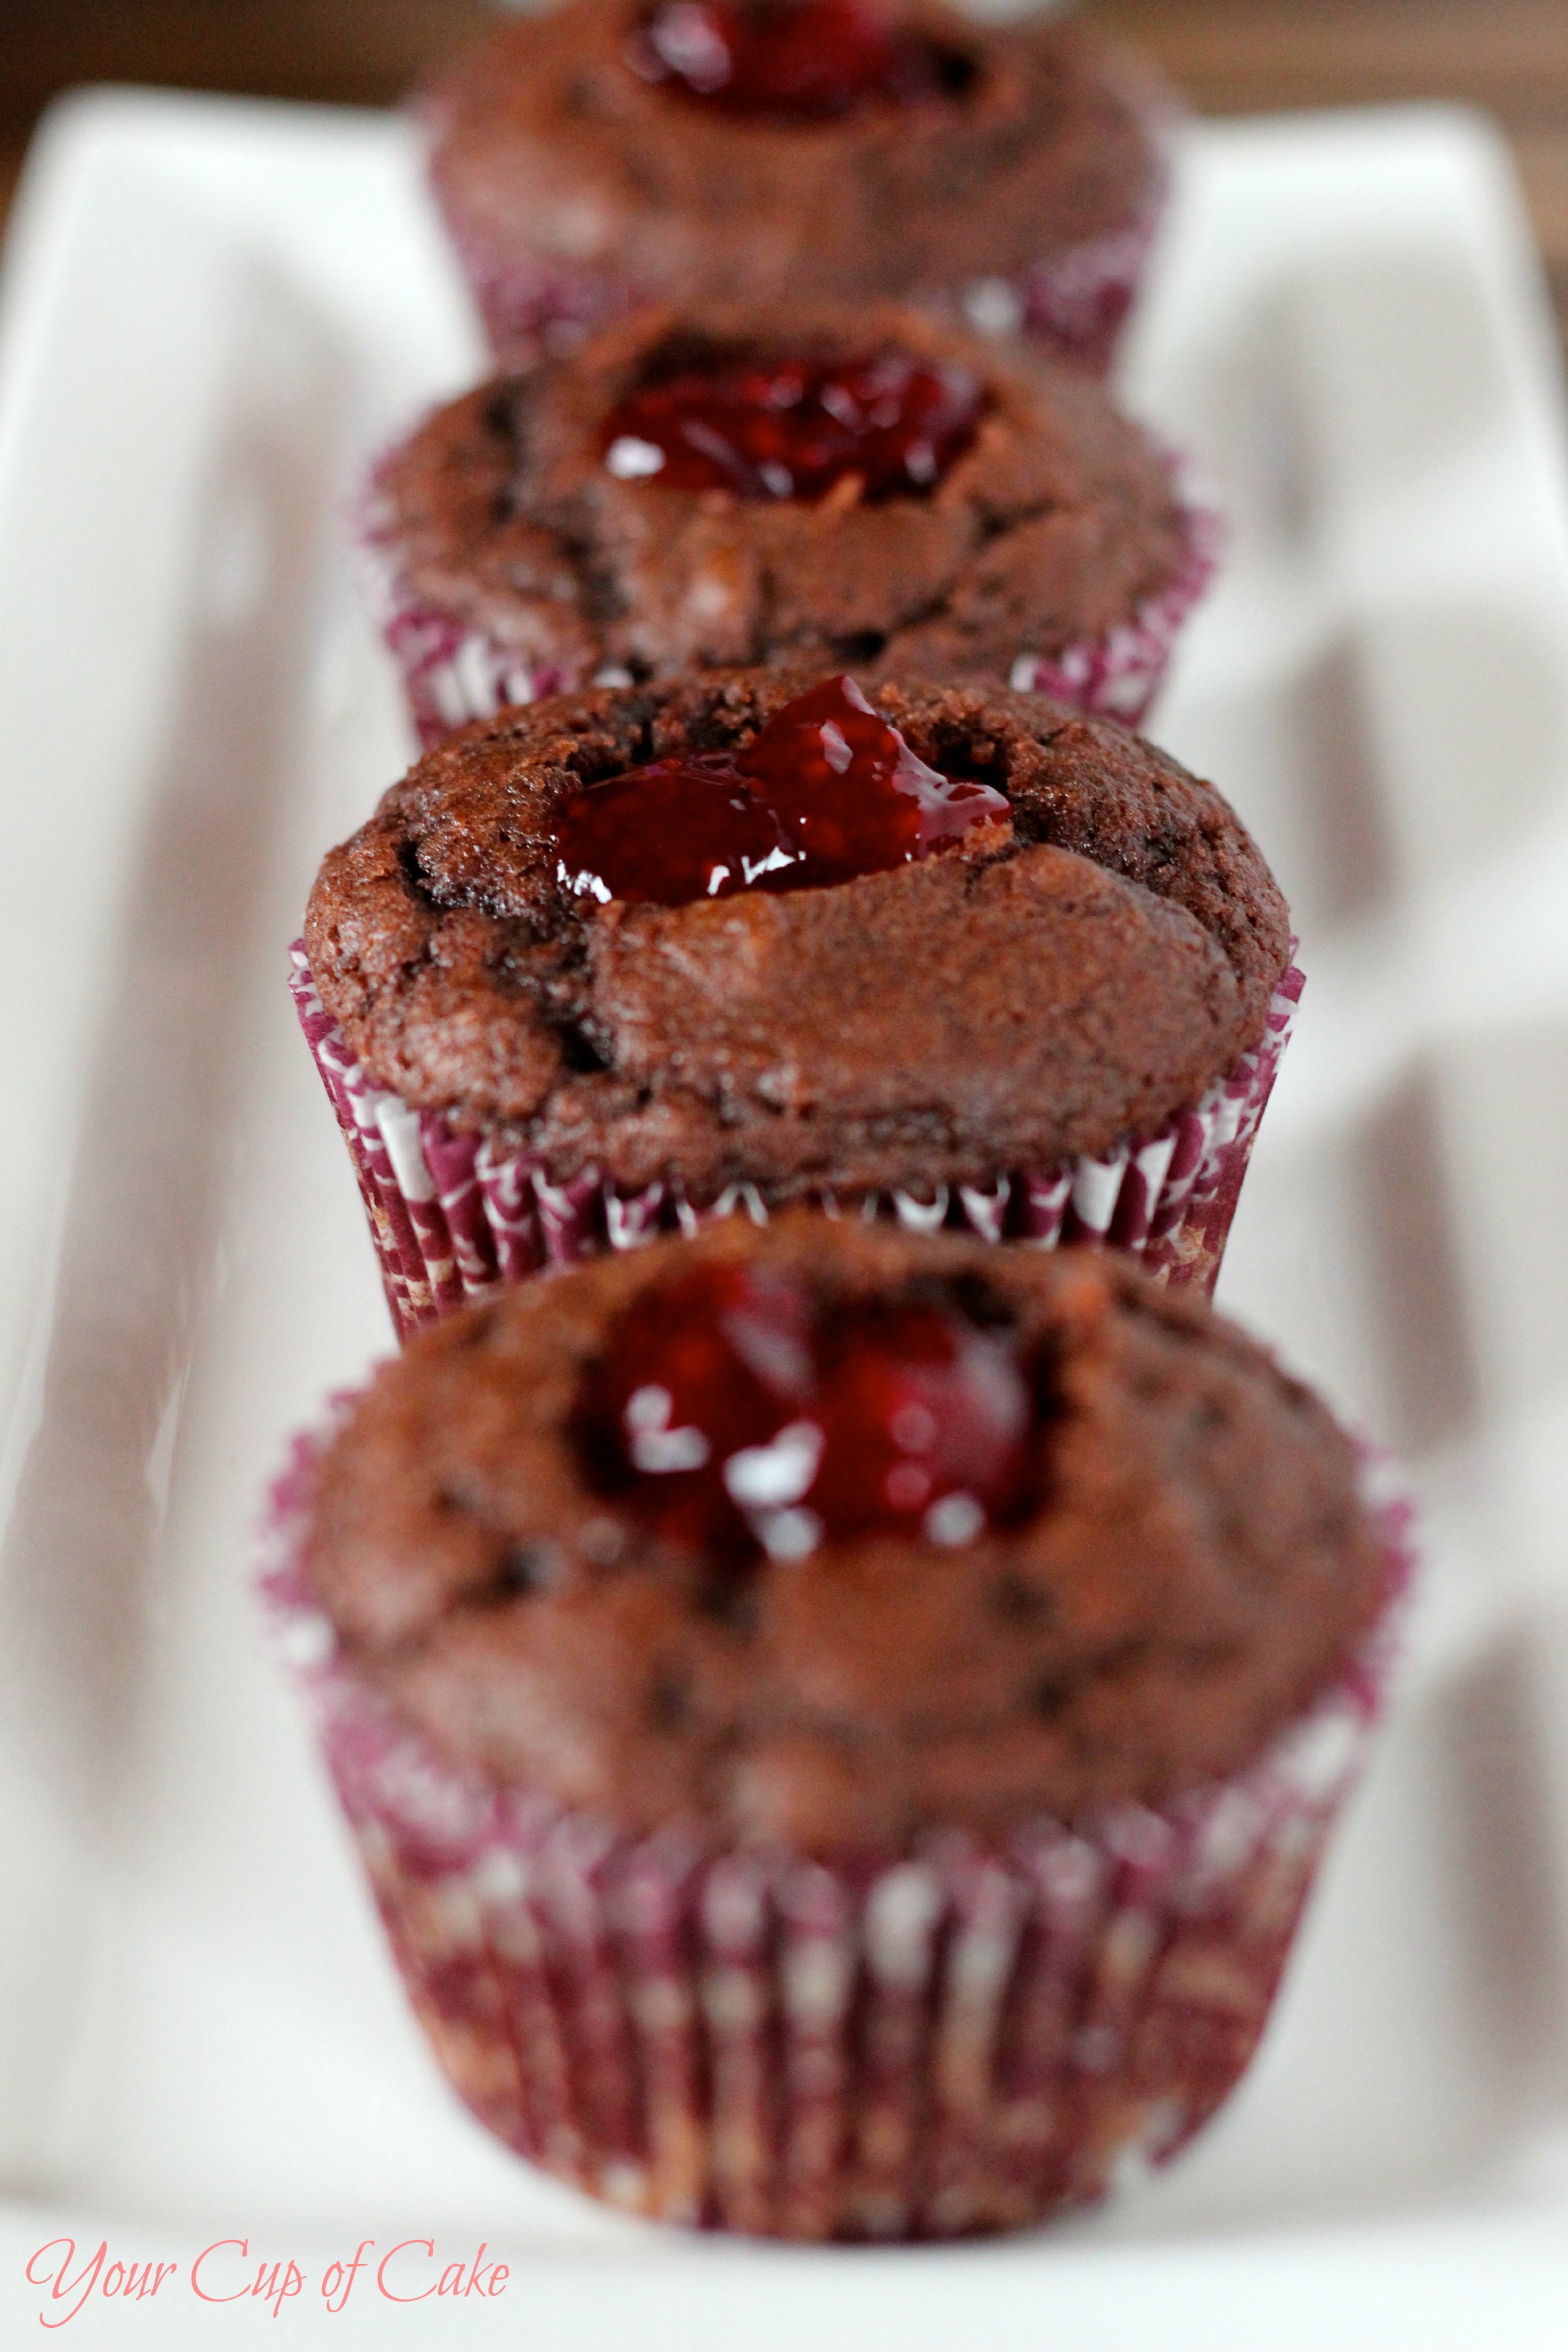 Chocolate Cupcakes with Raspberry Filling